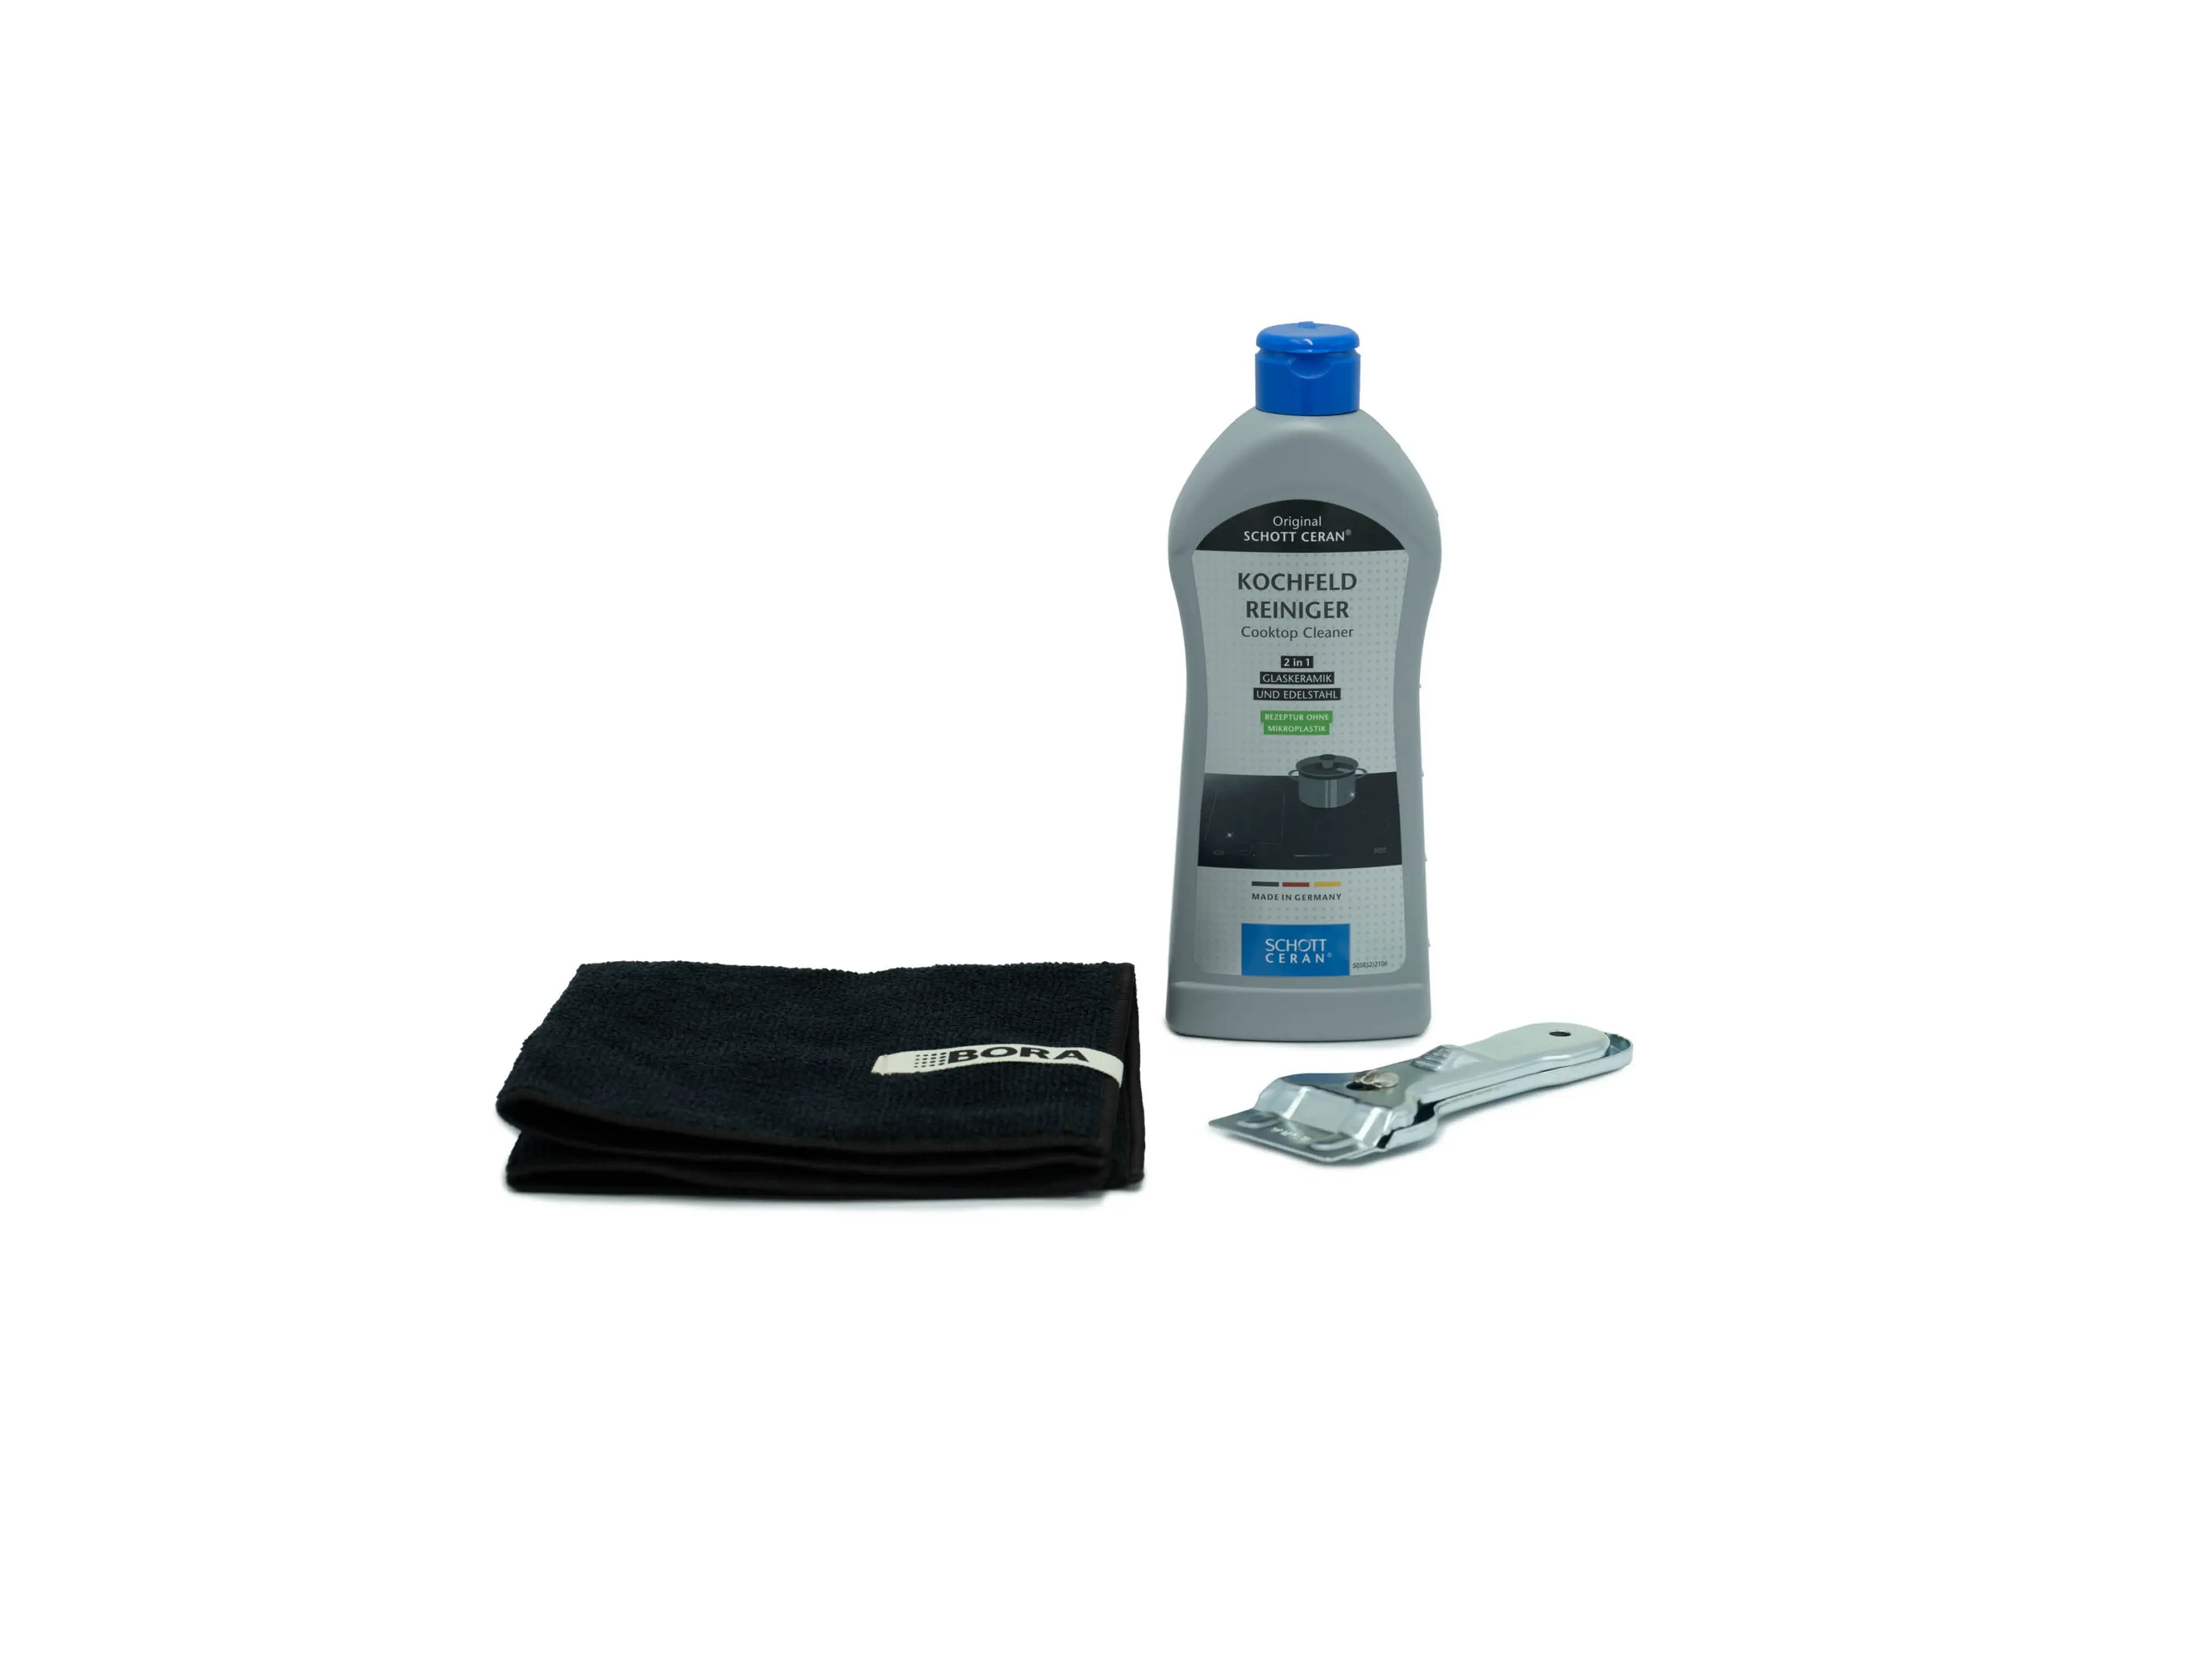 Glass-ceramic cleaning set